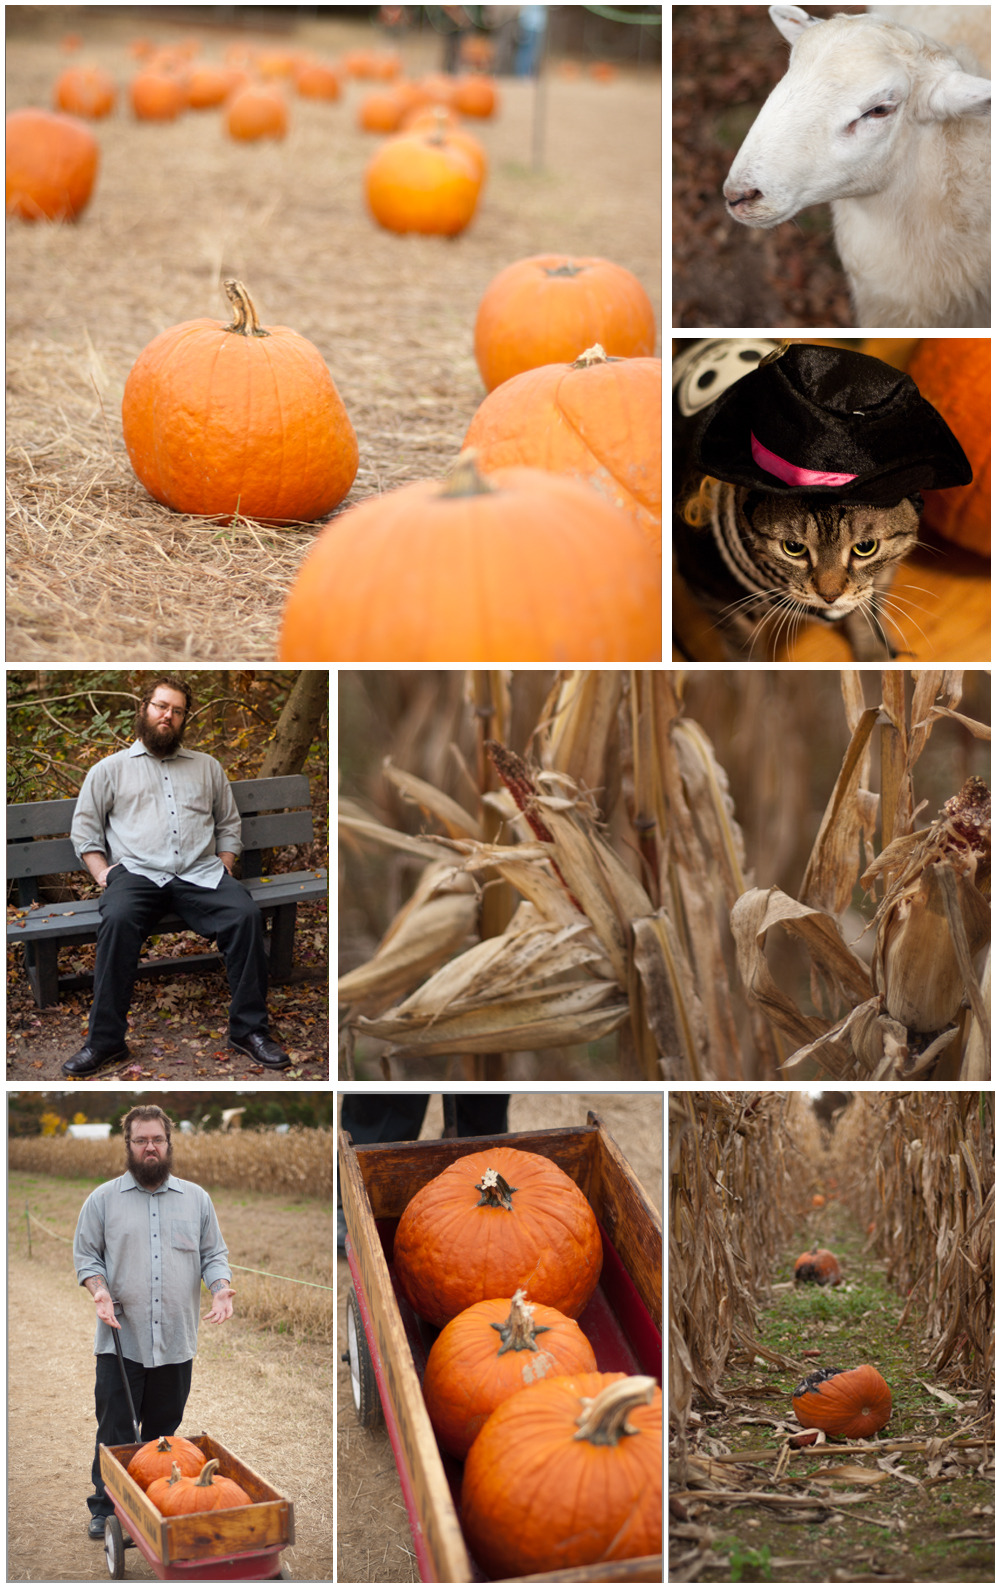 Decided to finally post photos of pumpkin picking, seeing as how there’s a random winter storm here..